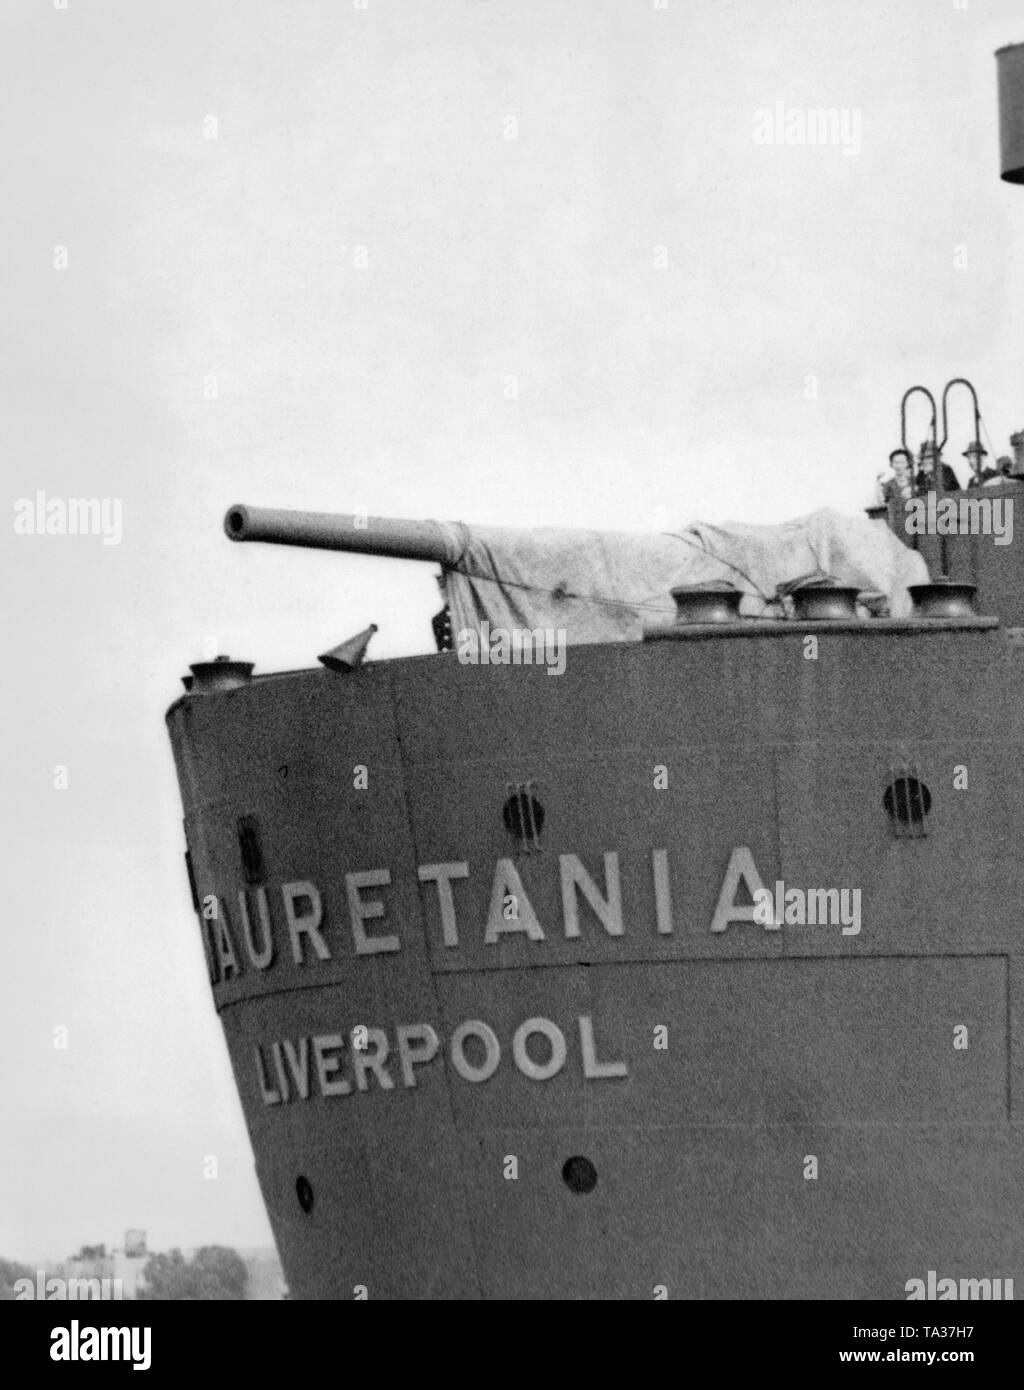 A submarine defense gun on the stern of the British ocean liner 'Mauretania'. The 'Mauretania' served as a troop-carrier during the Second World War. Stock Photo